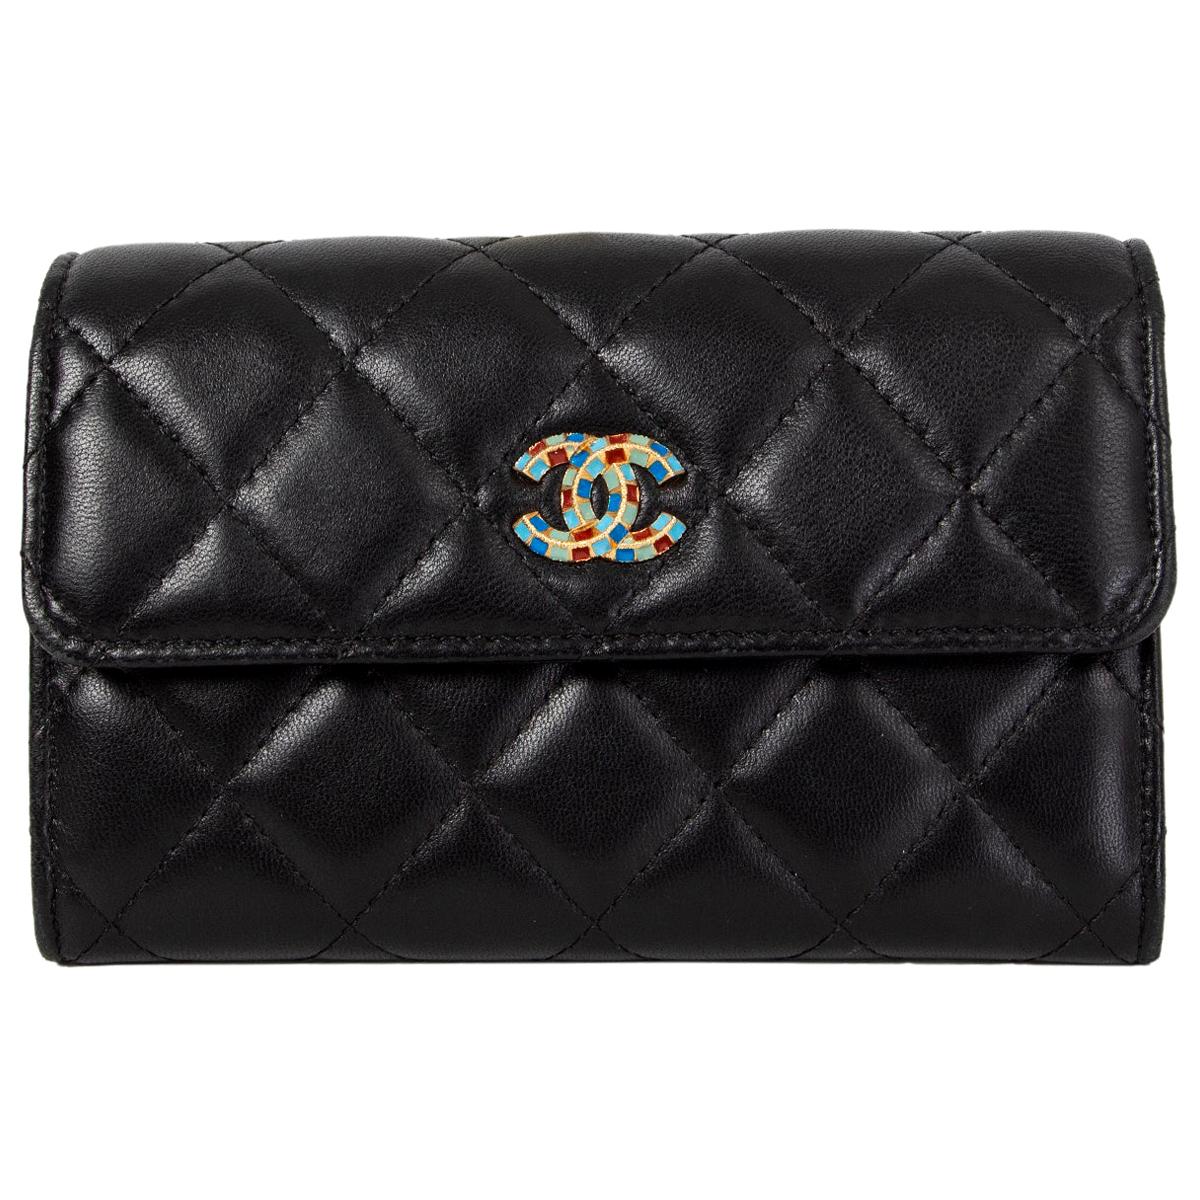 CHANEL black quilted leather EGYPT CC Wallet